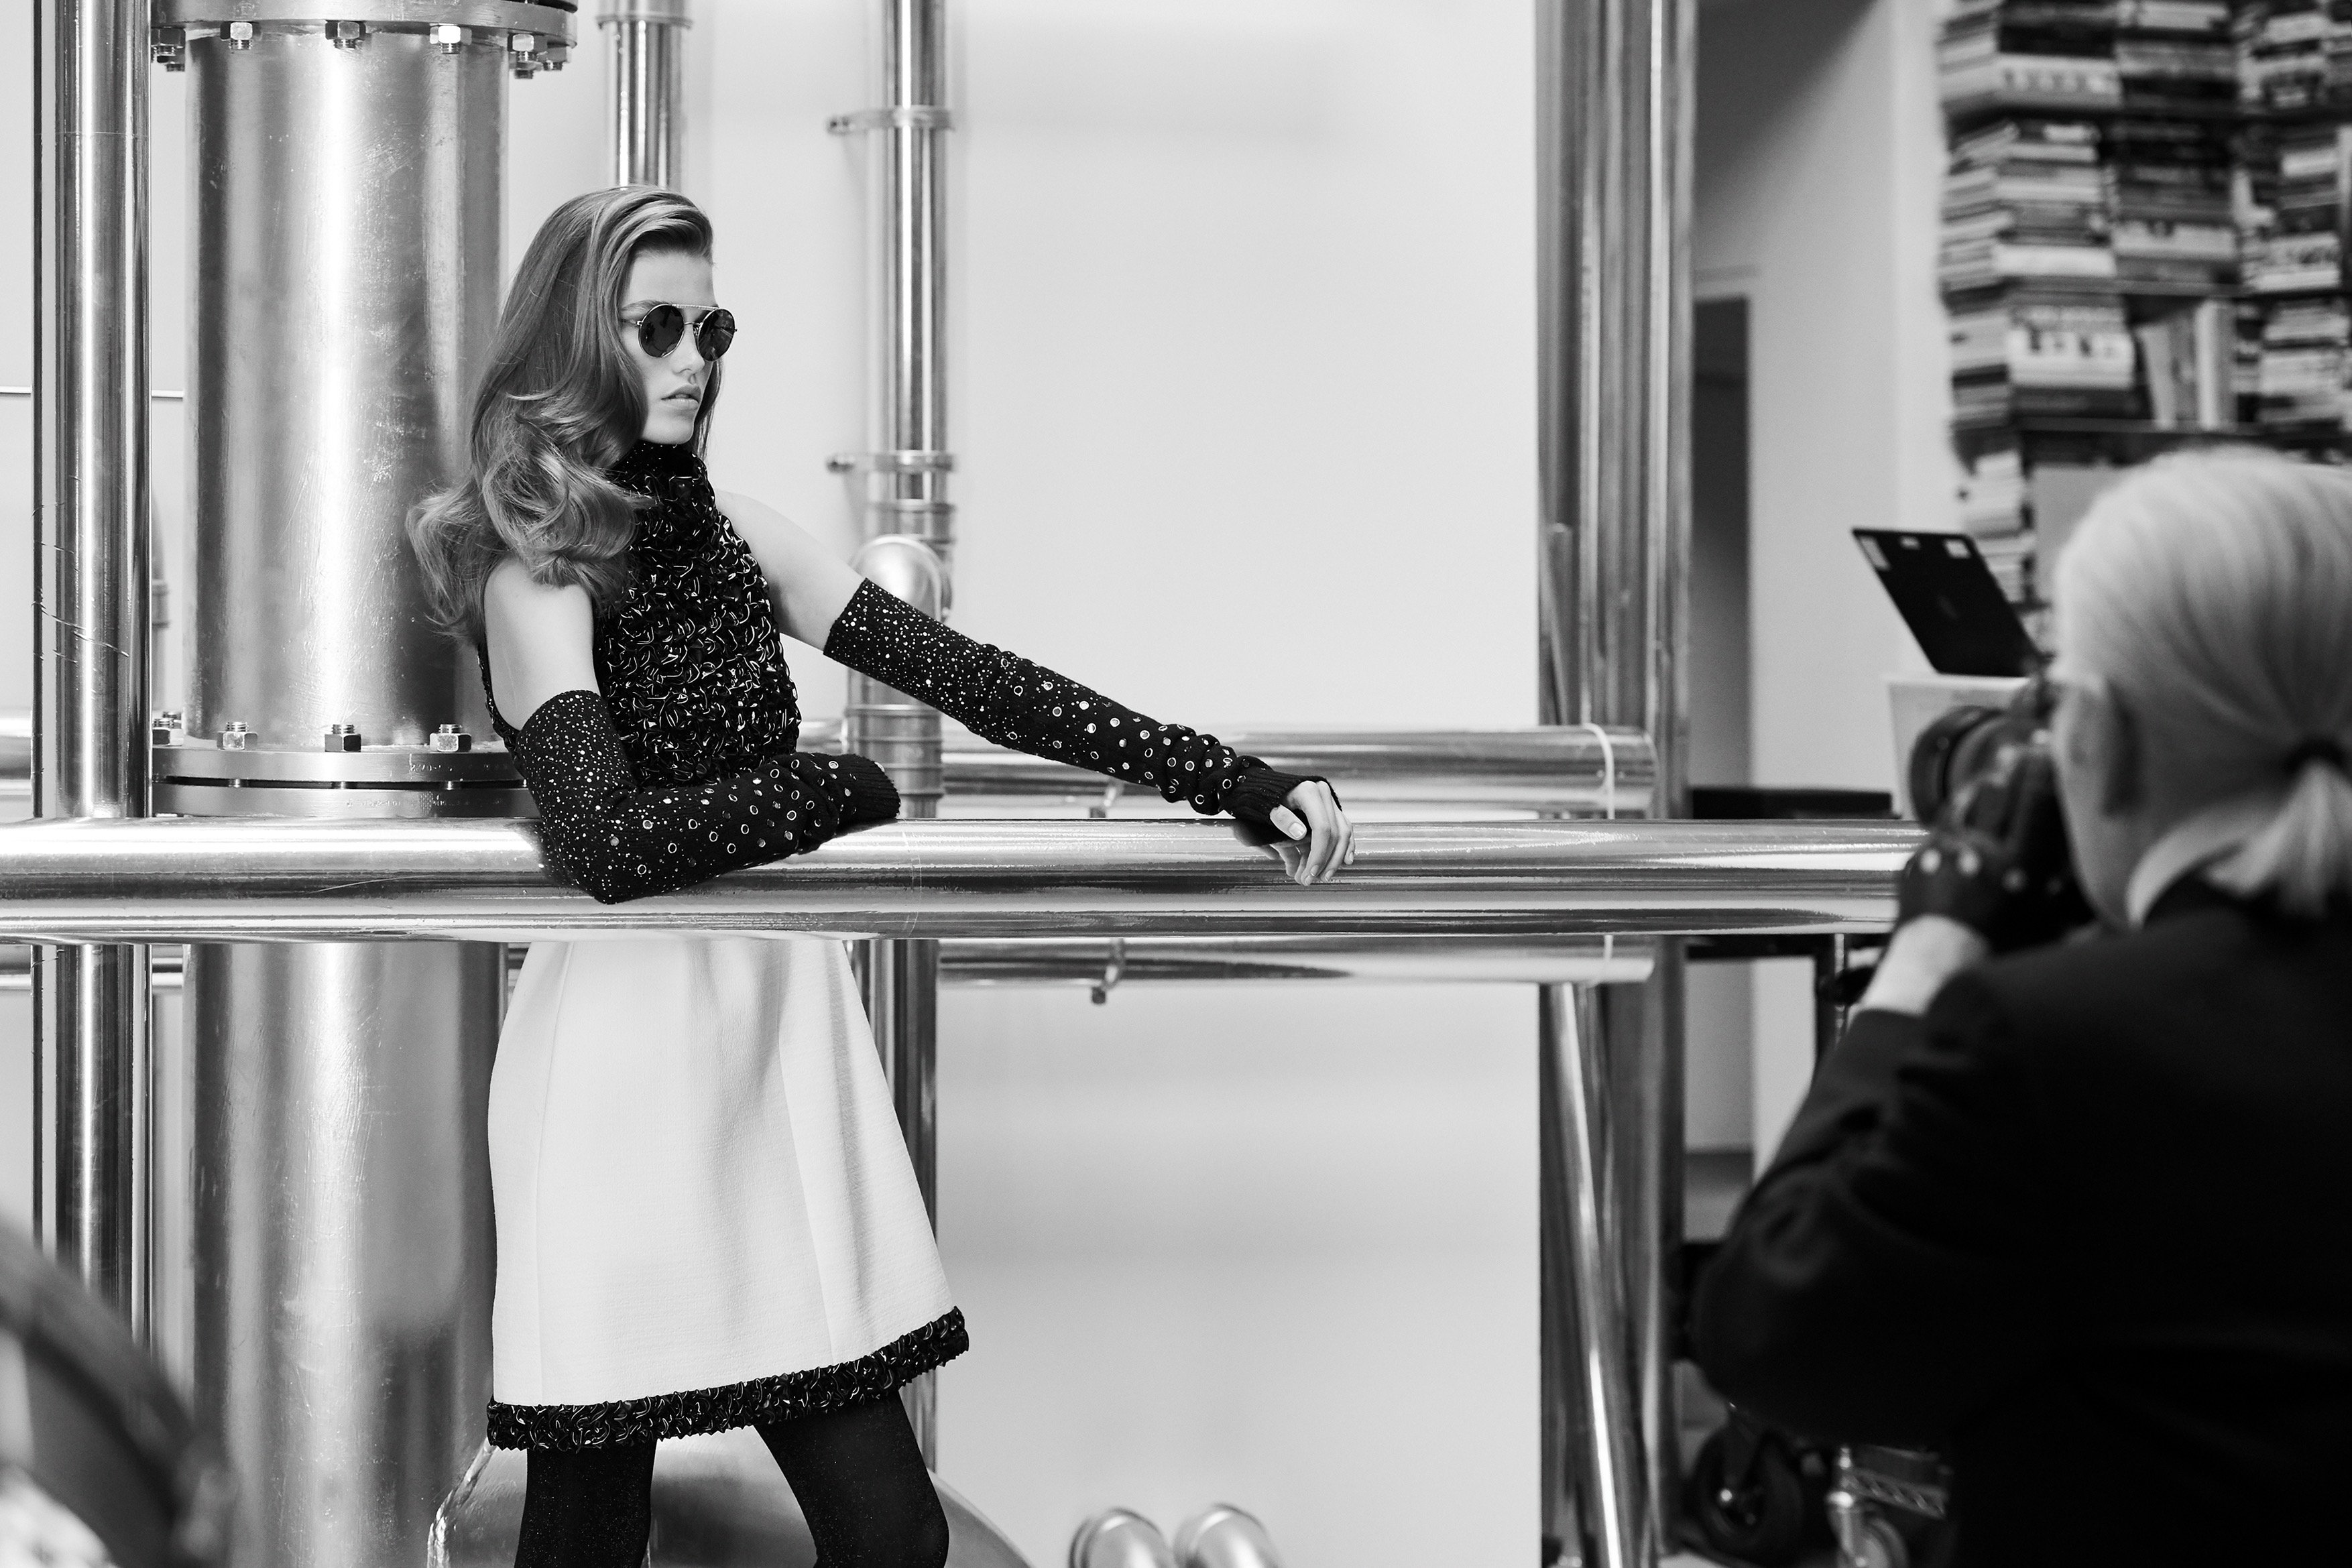 CHANEL on Twitter: "Shooting of the 2017/18 eyewear campaign. #CHANELSunglasses photos on https://t.co/8neQg79kge / Twitter